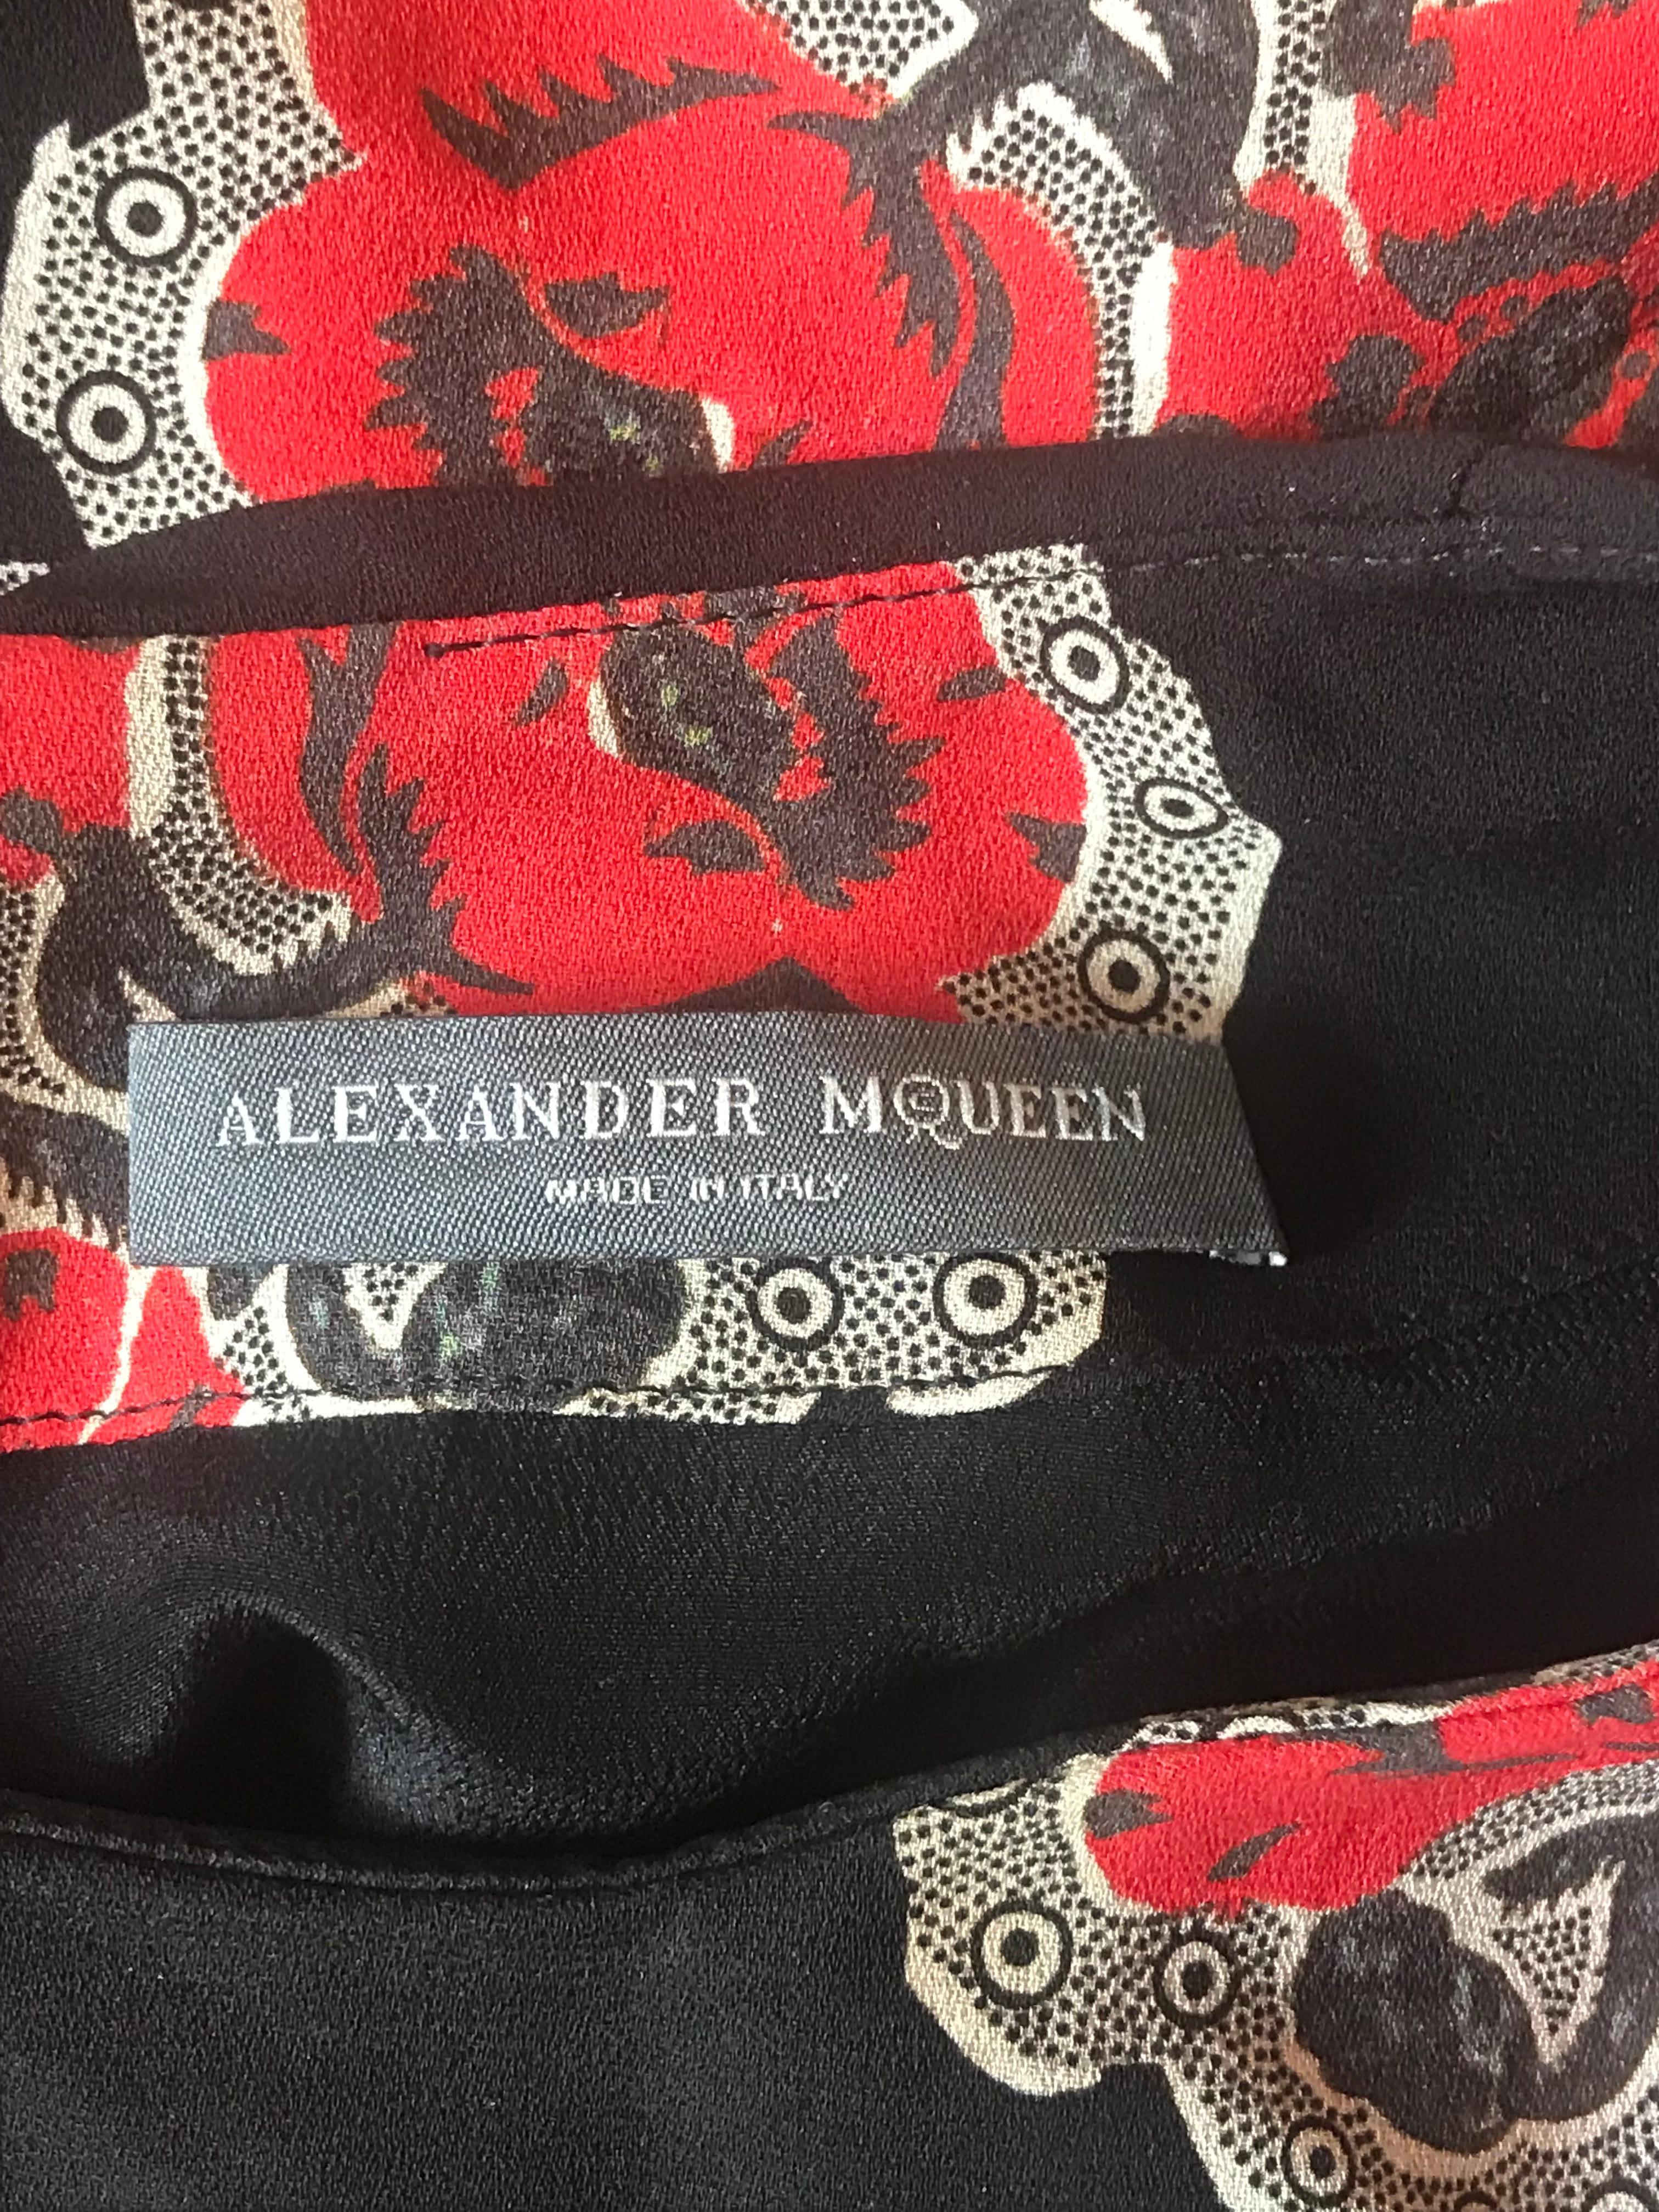 Unworn Alexander McQueen Cape Back Black and Red Floral Poppy Print Silk Dress  In New Condition For Sale In San Francisco, CA